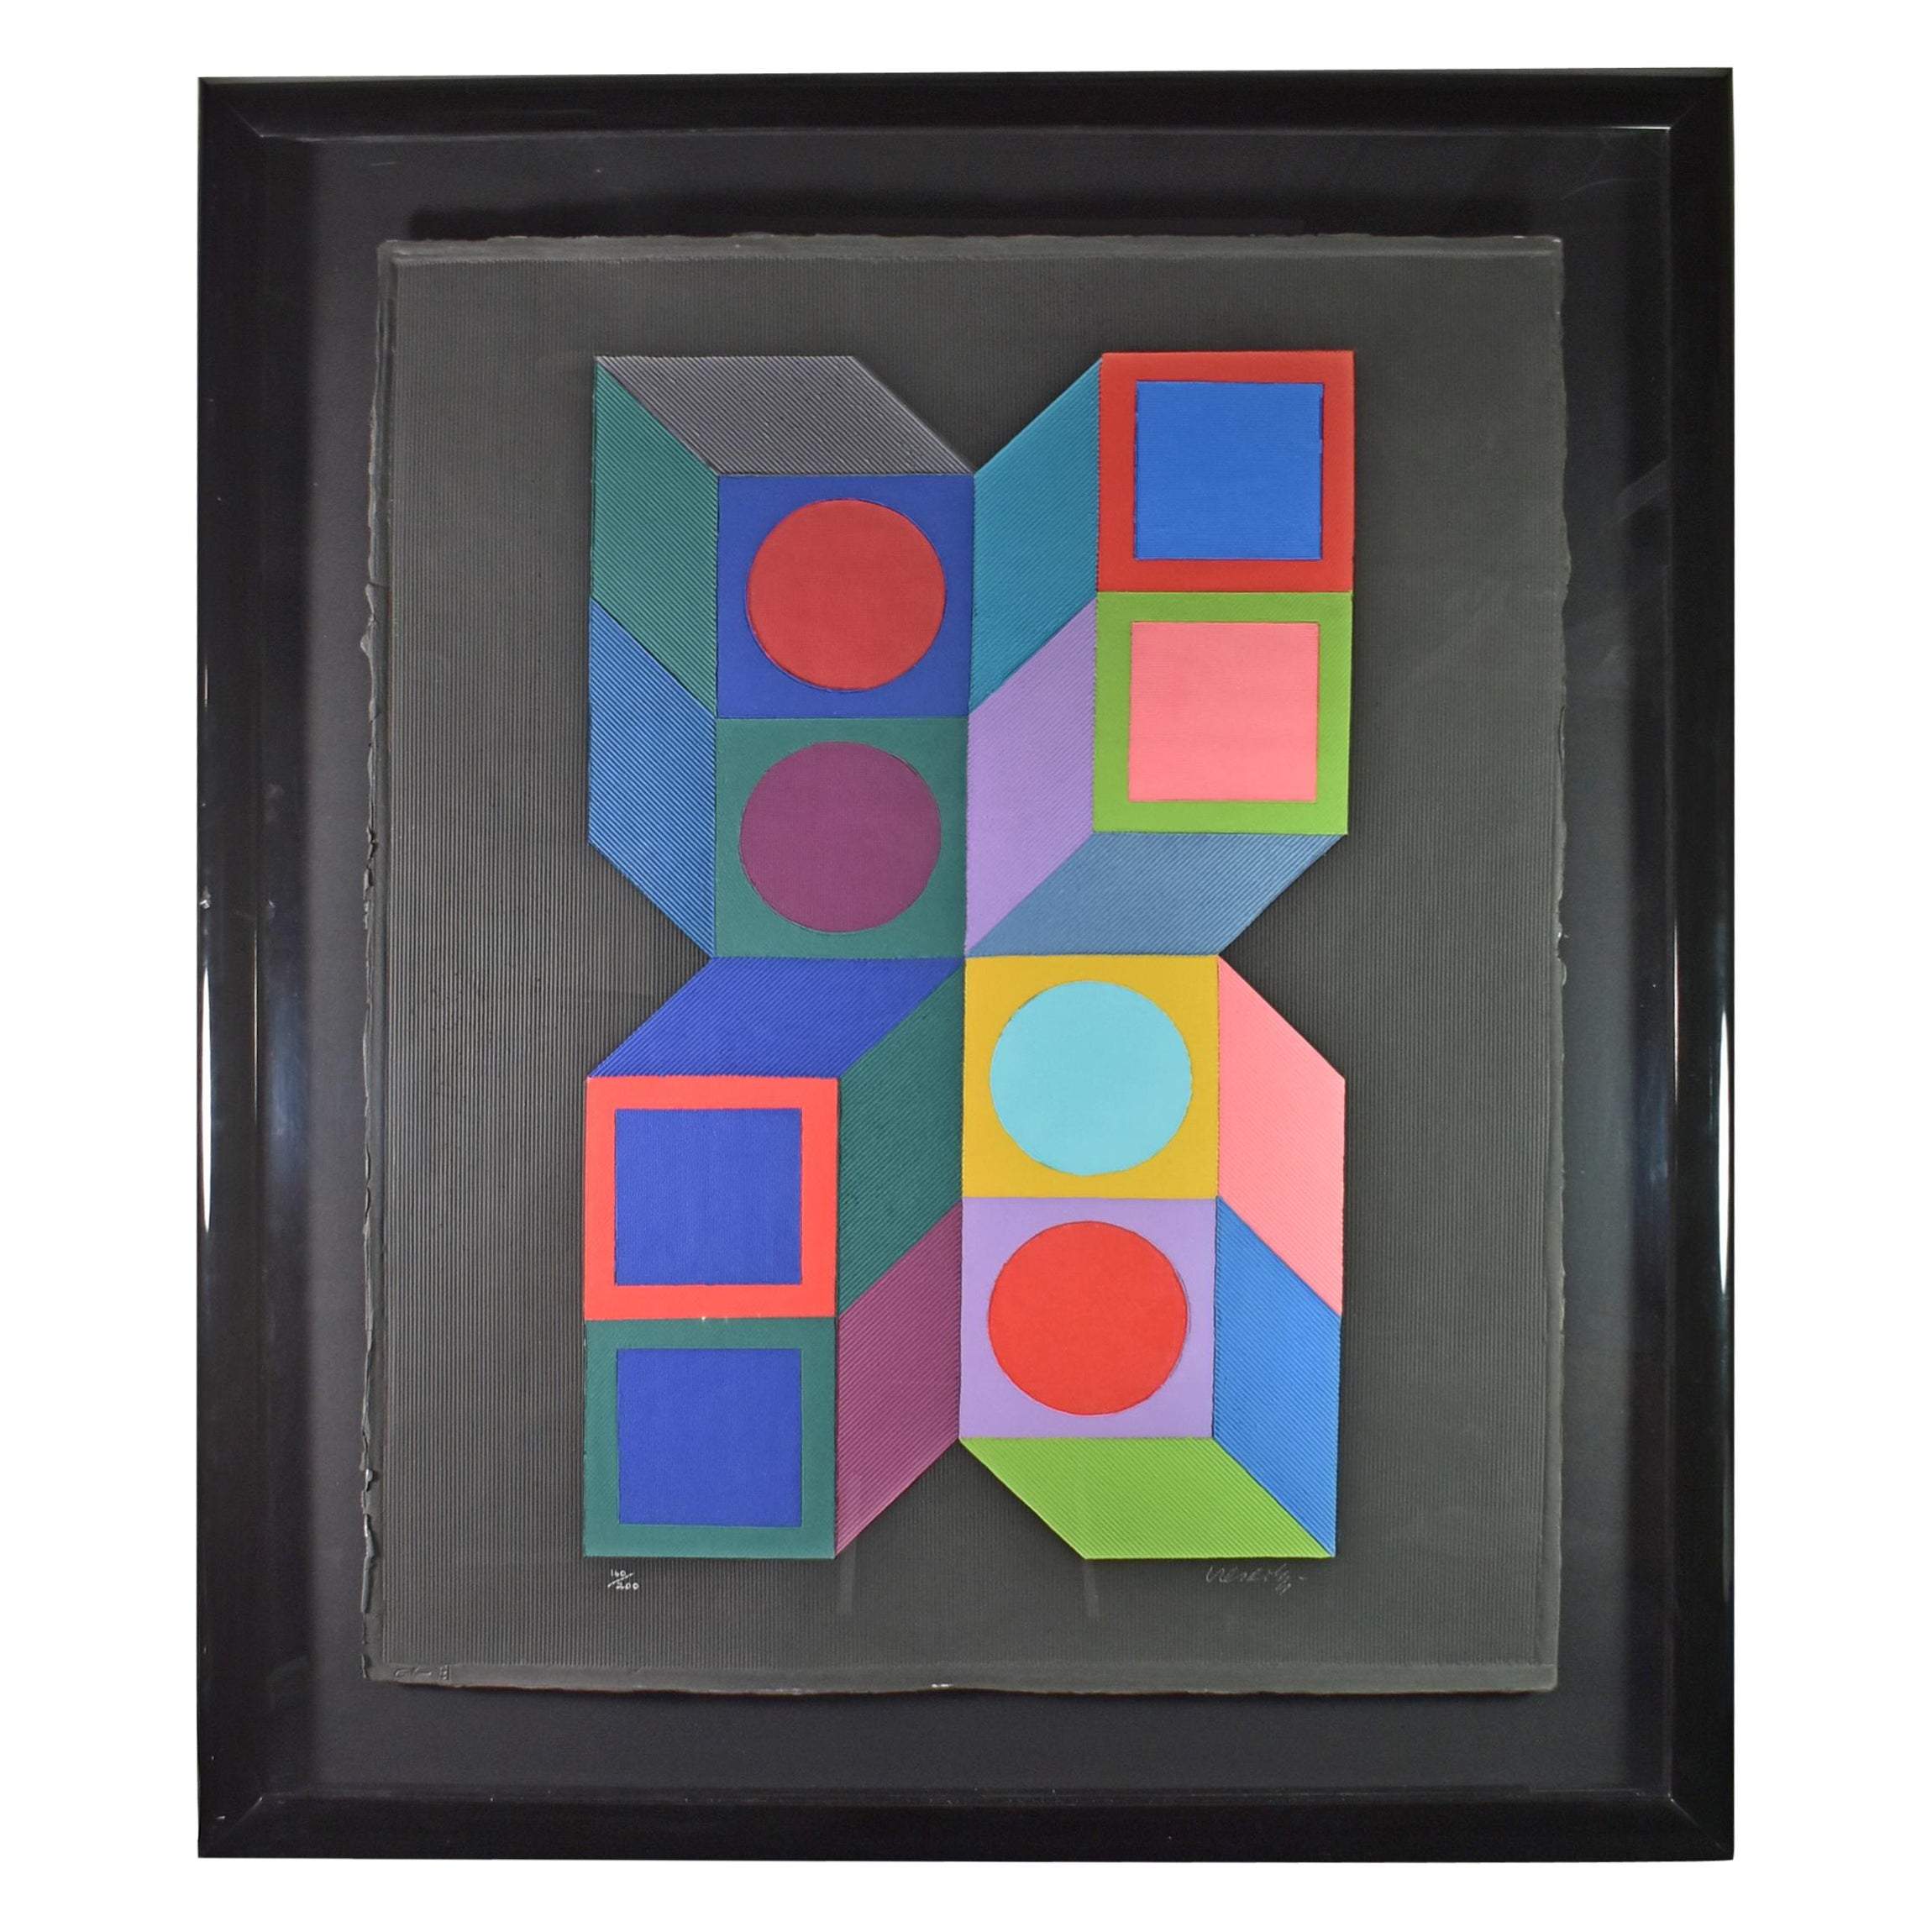 Victor Vasarely "Hexa 5" Serigraph 160/200, Sonora Collage Collection